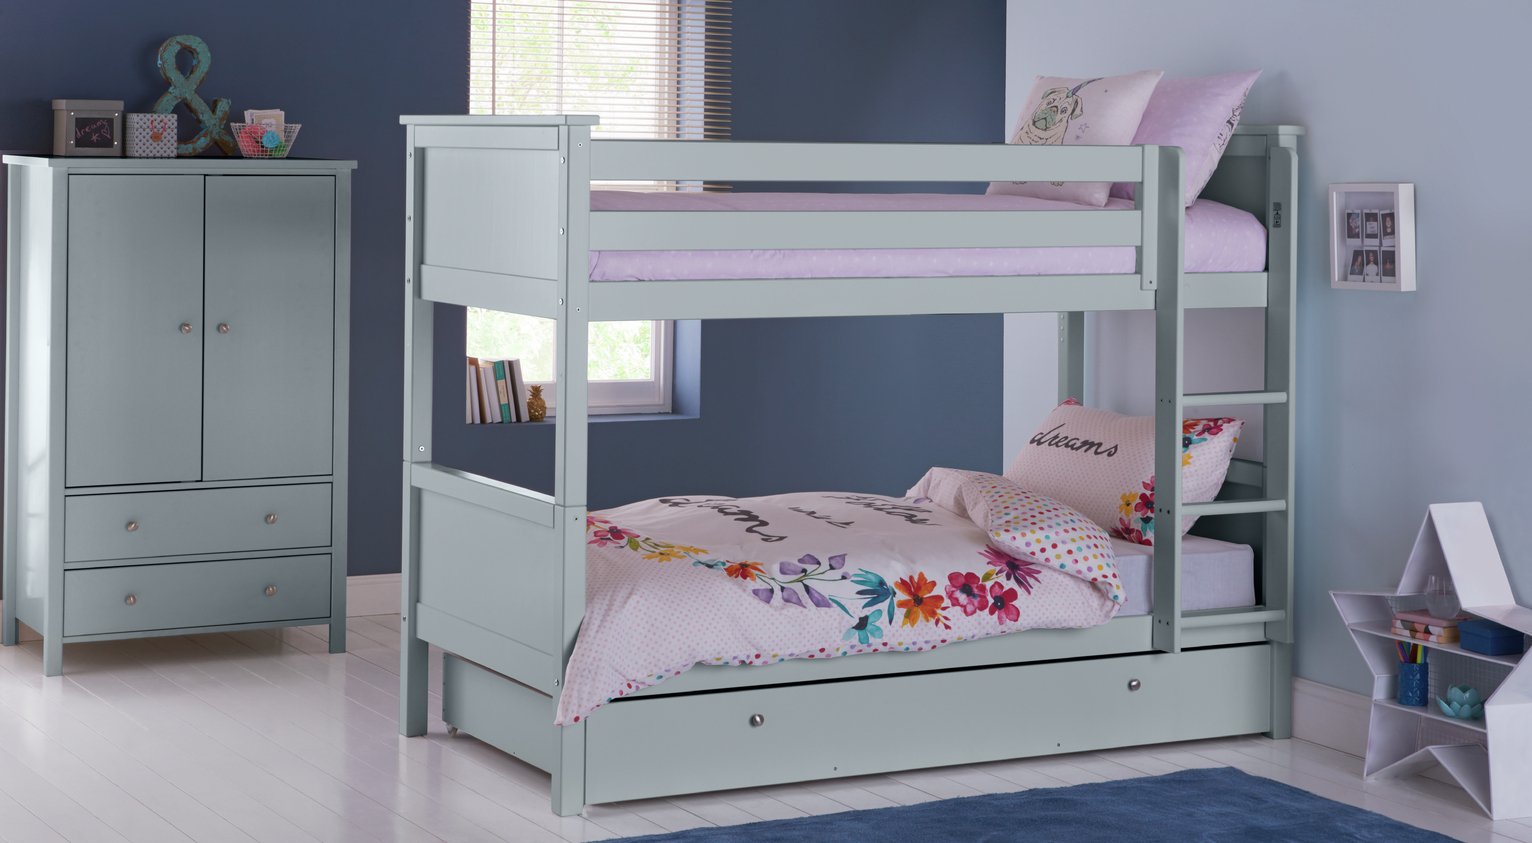 Argos Home Brooklyn Bunk Bed with Drawer - Grey